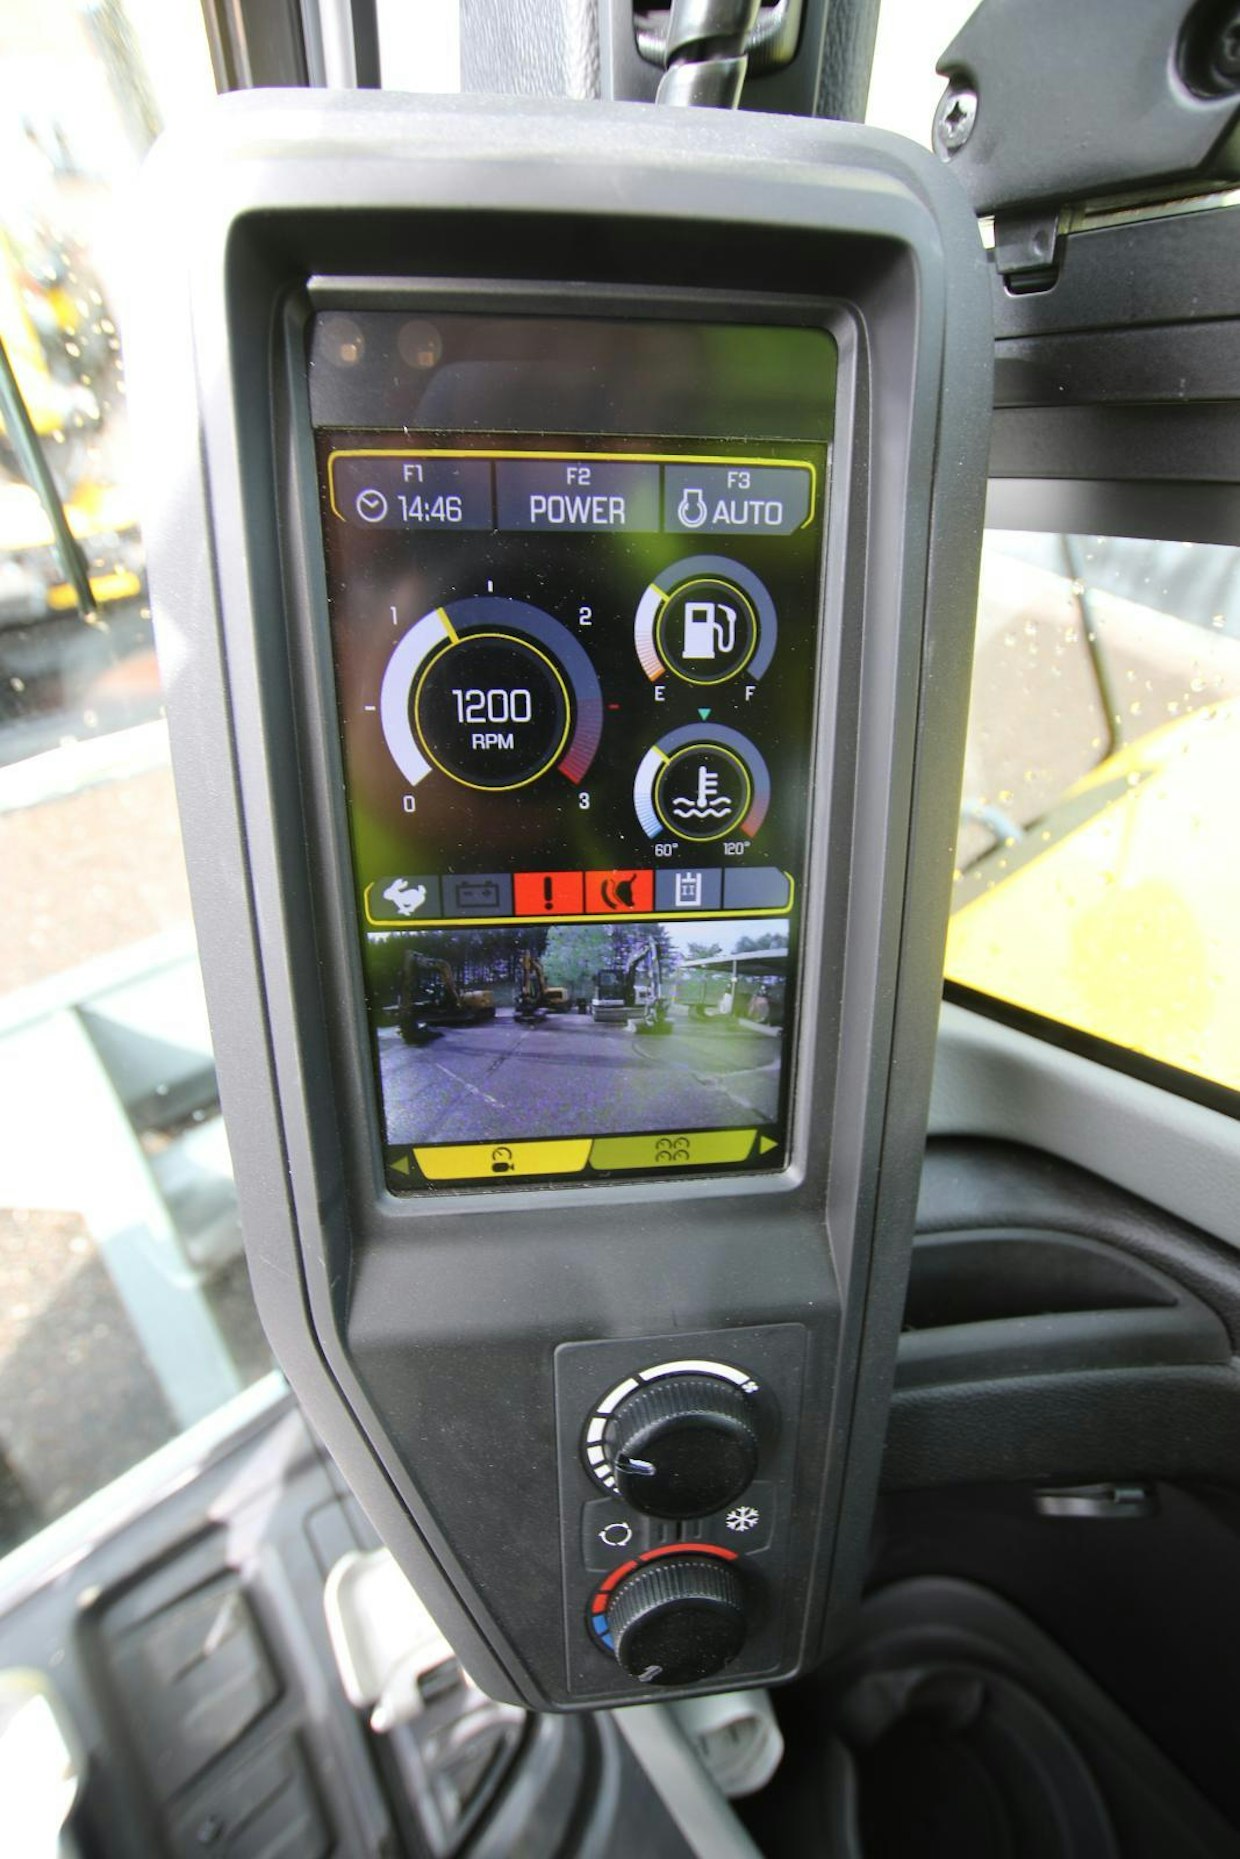 There were big differences in the display sizes. The largest is the colourful and easy-to-read display of the Wacker Neuson. The machine also comes with a reversing camera.